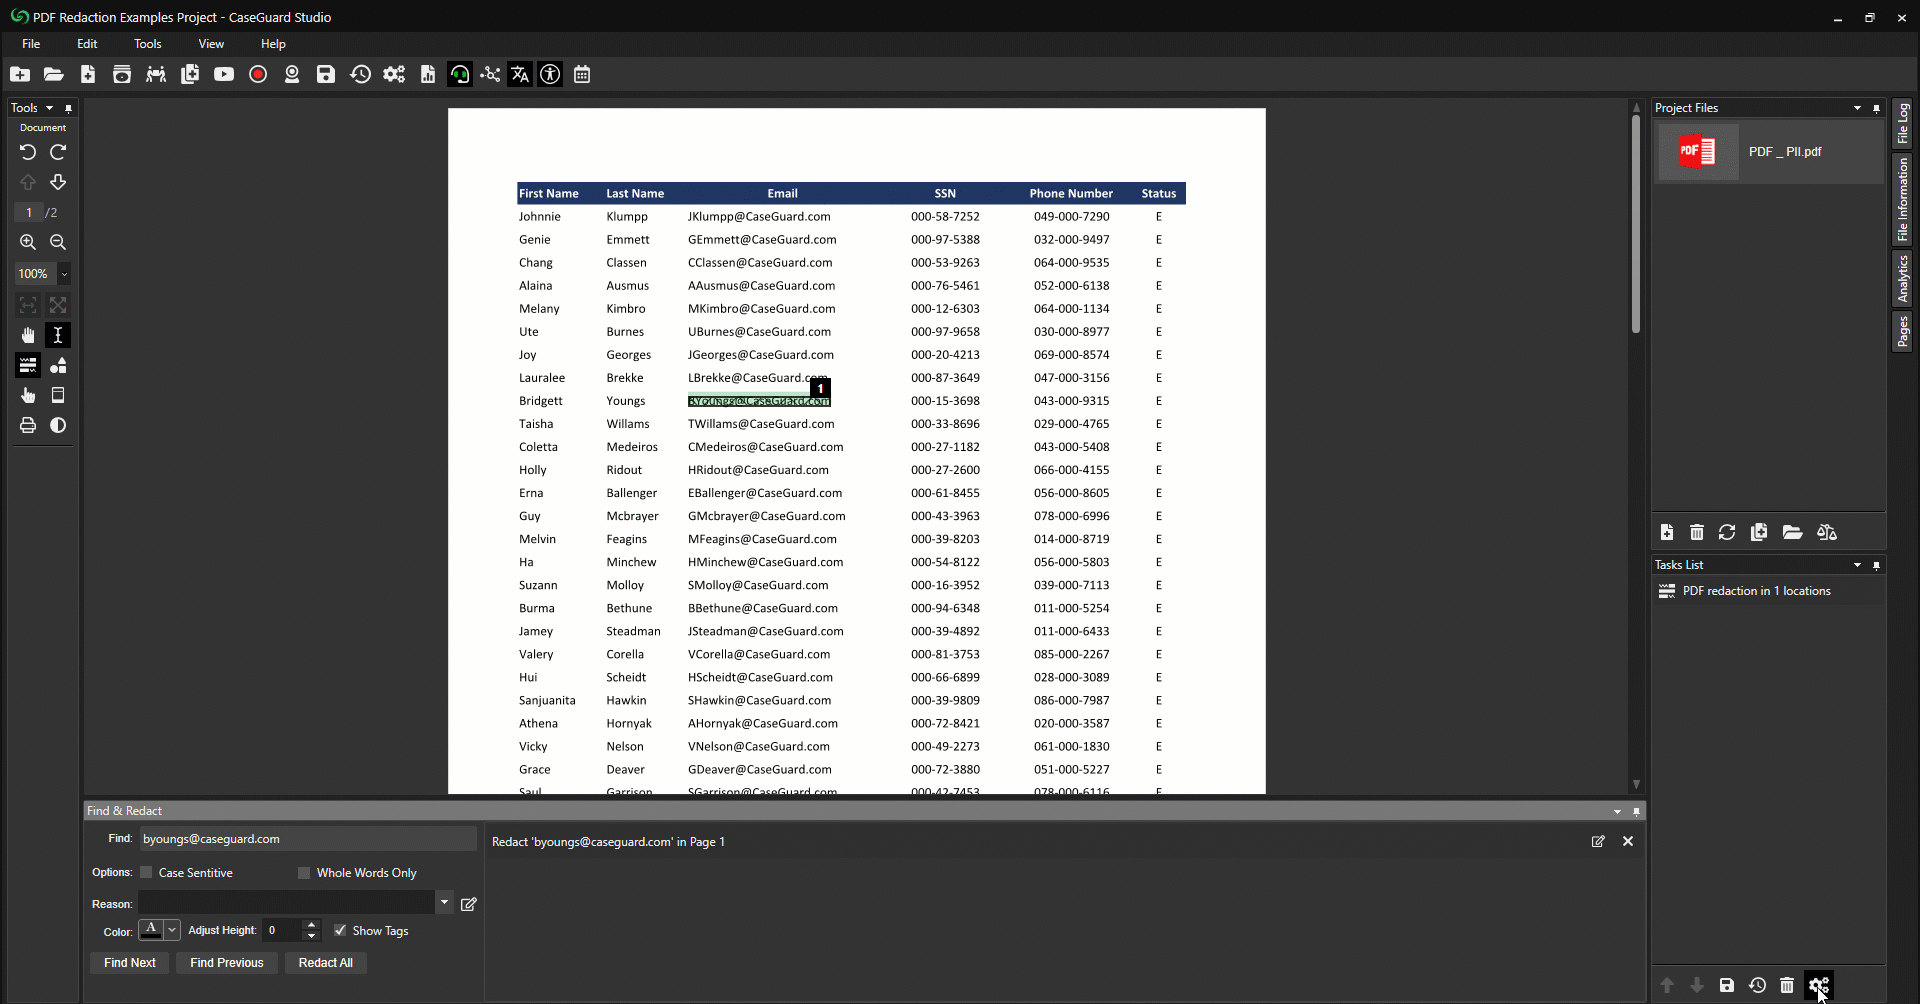 CaseGuard find and redact process